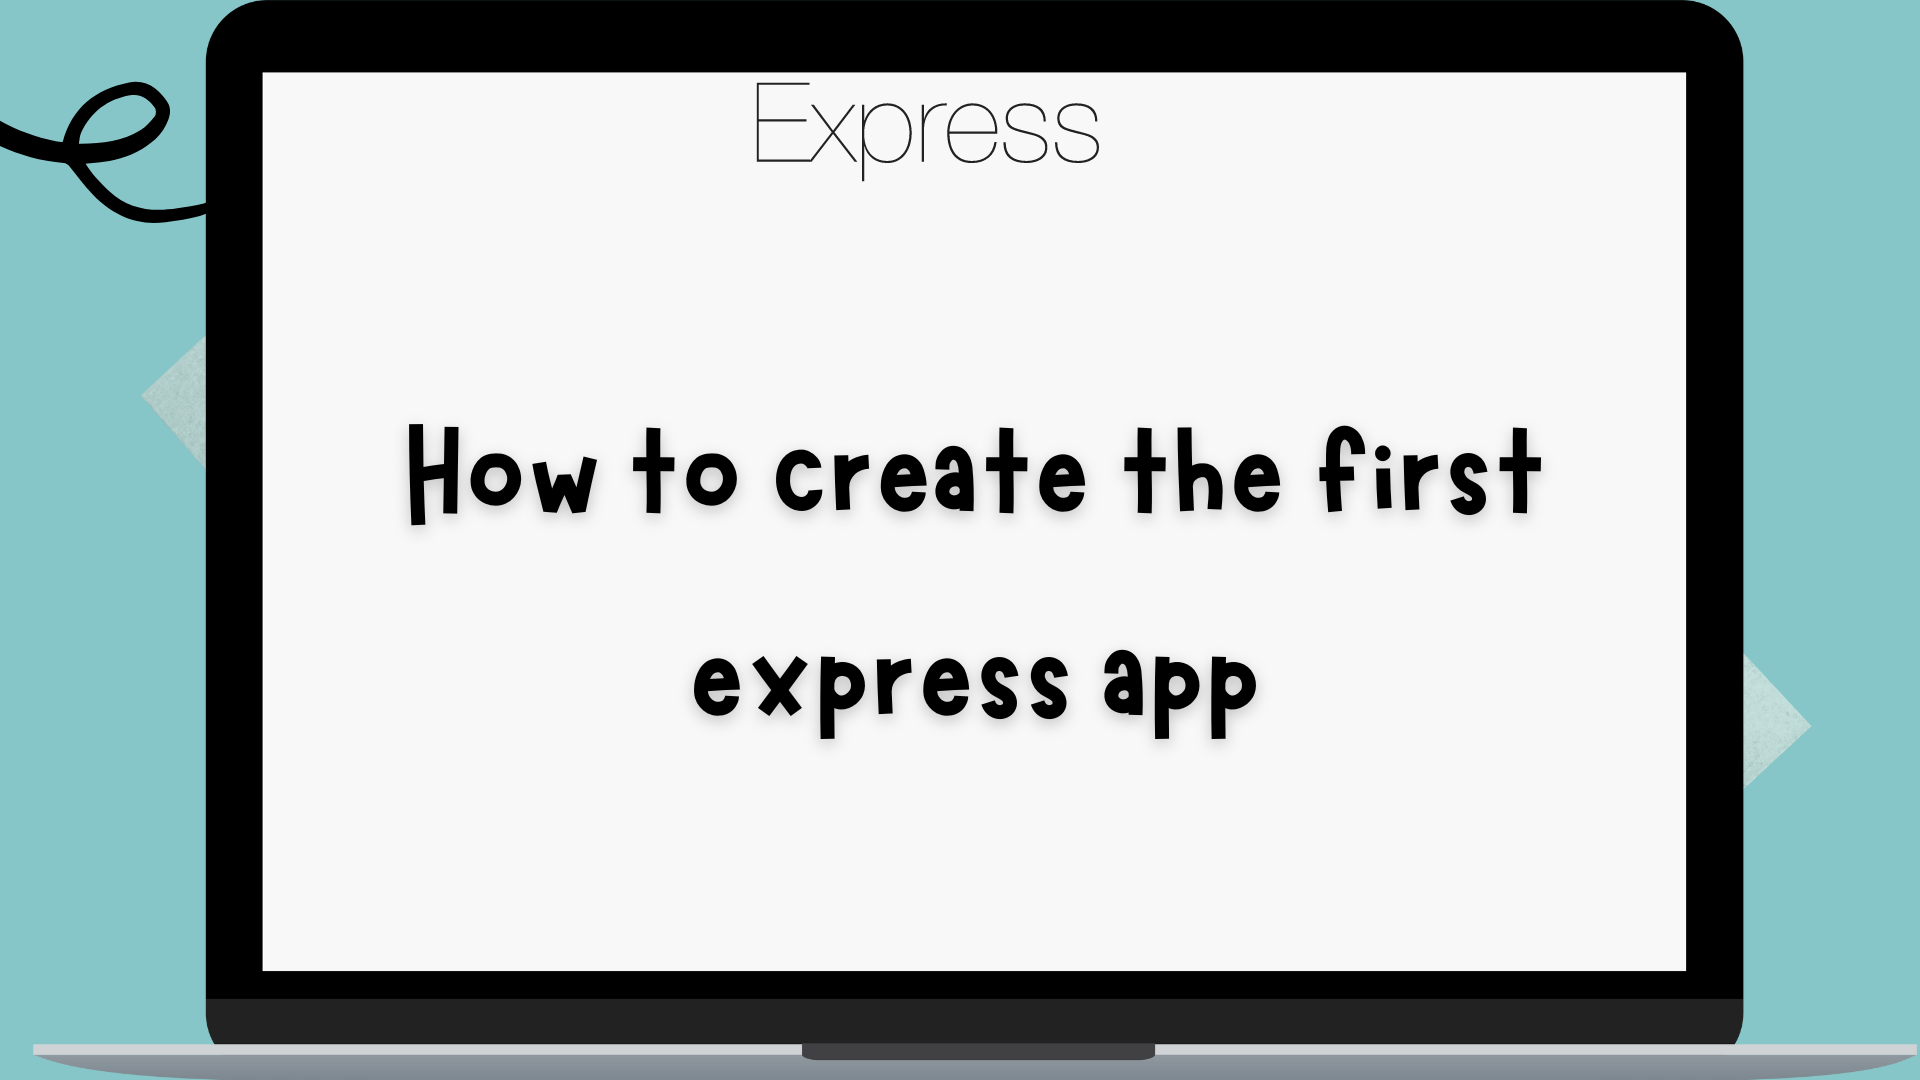 How to create the first express app